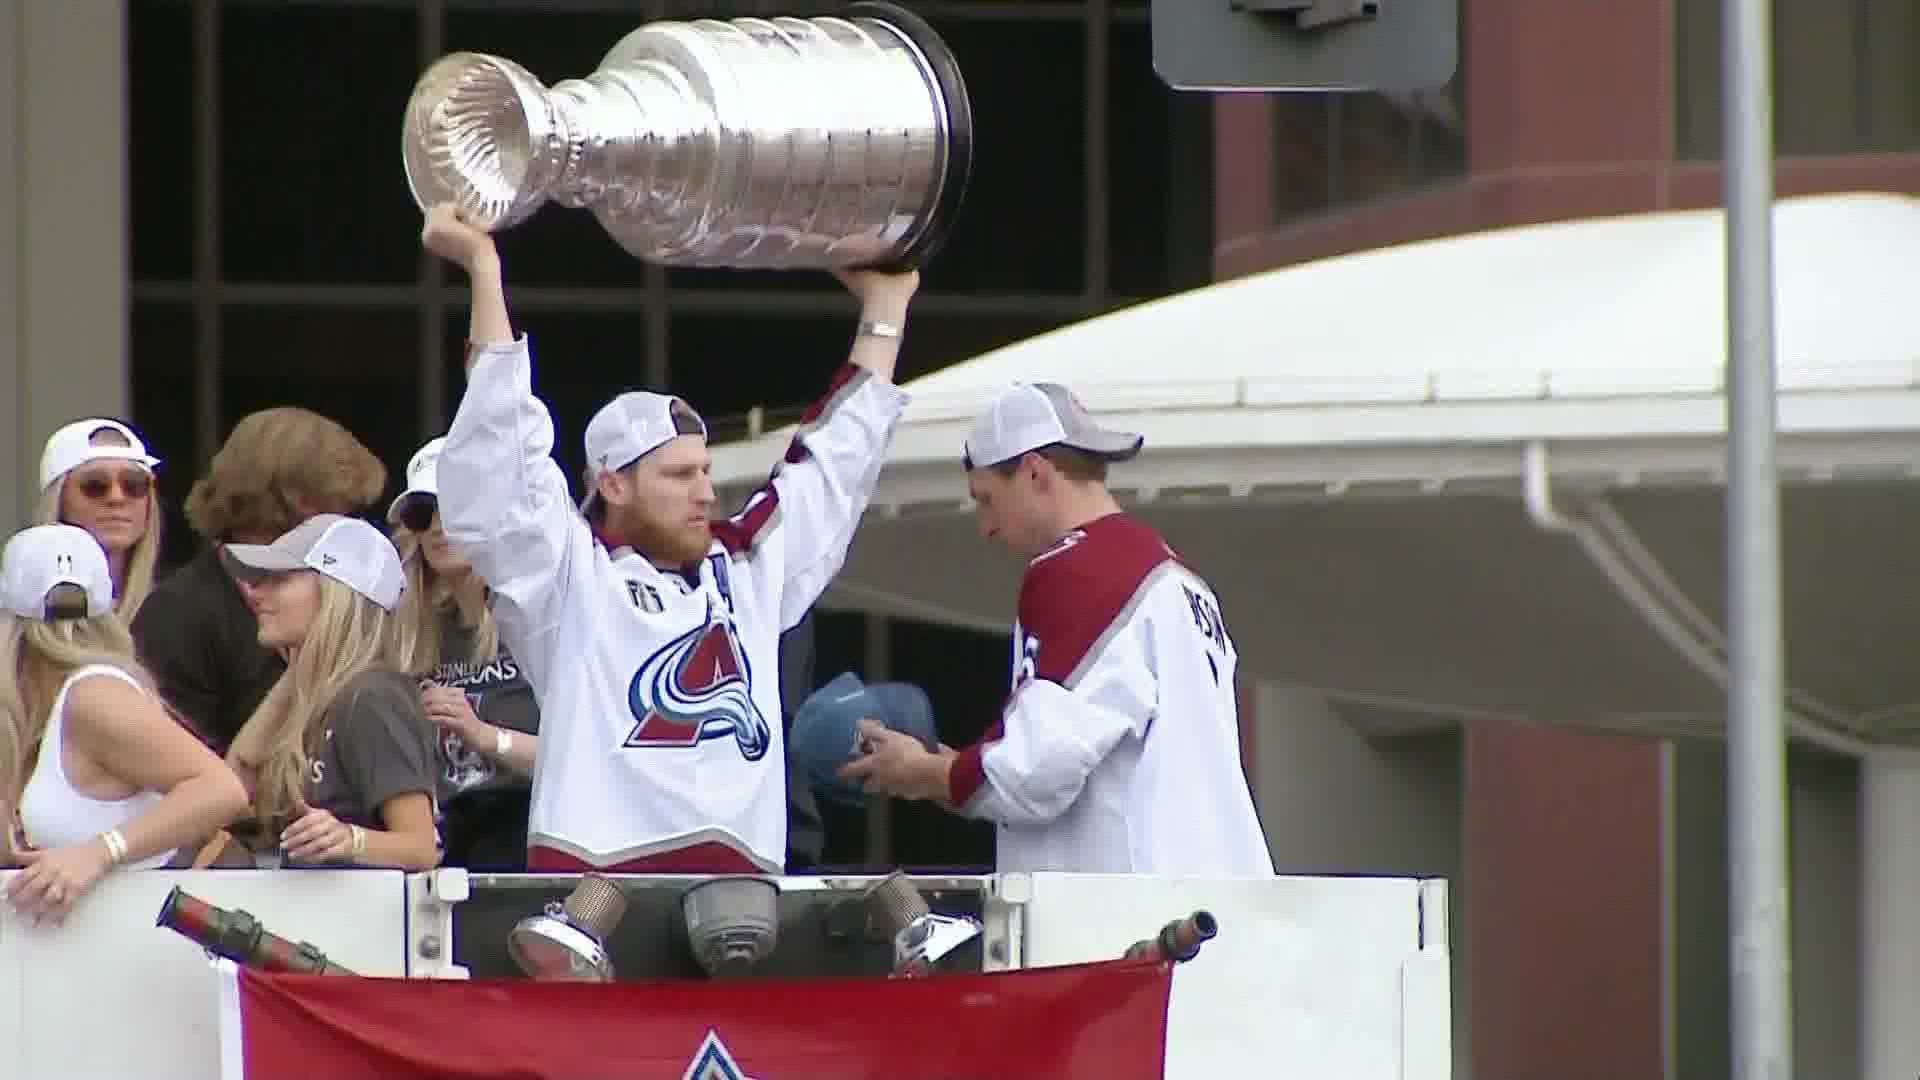 A Stanley Cup championship parade drove through the streets of Denver for the first time in 21 years on Thursday, June 30.